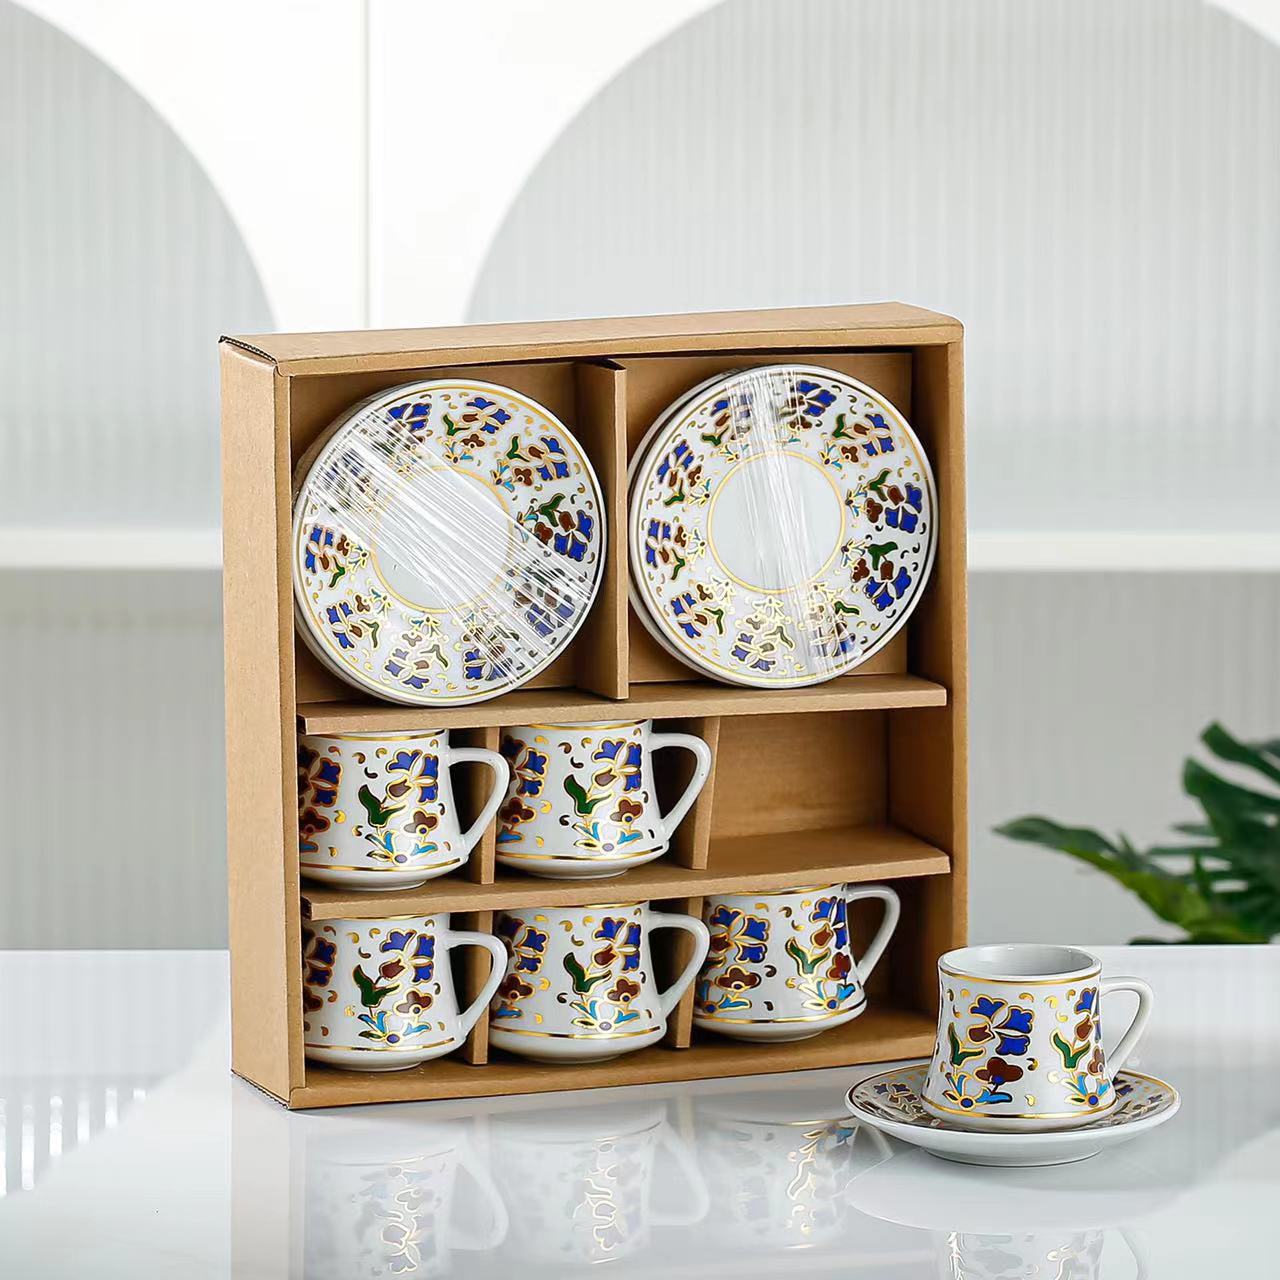 New European-Style Ceramic Coffee Cup Set Cross-Border Middle East Bronzing Coffee Cup 6 Cups 6 Plates Gift Afternoon Tea Cup